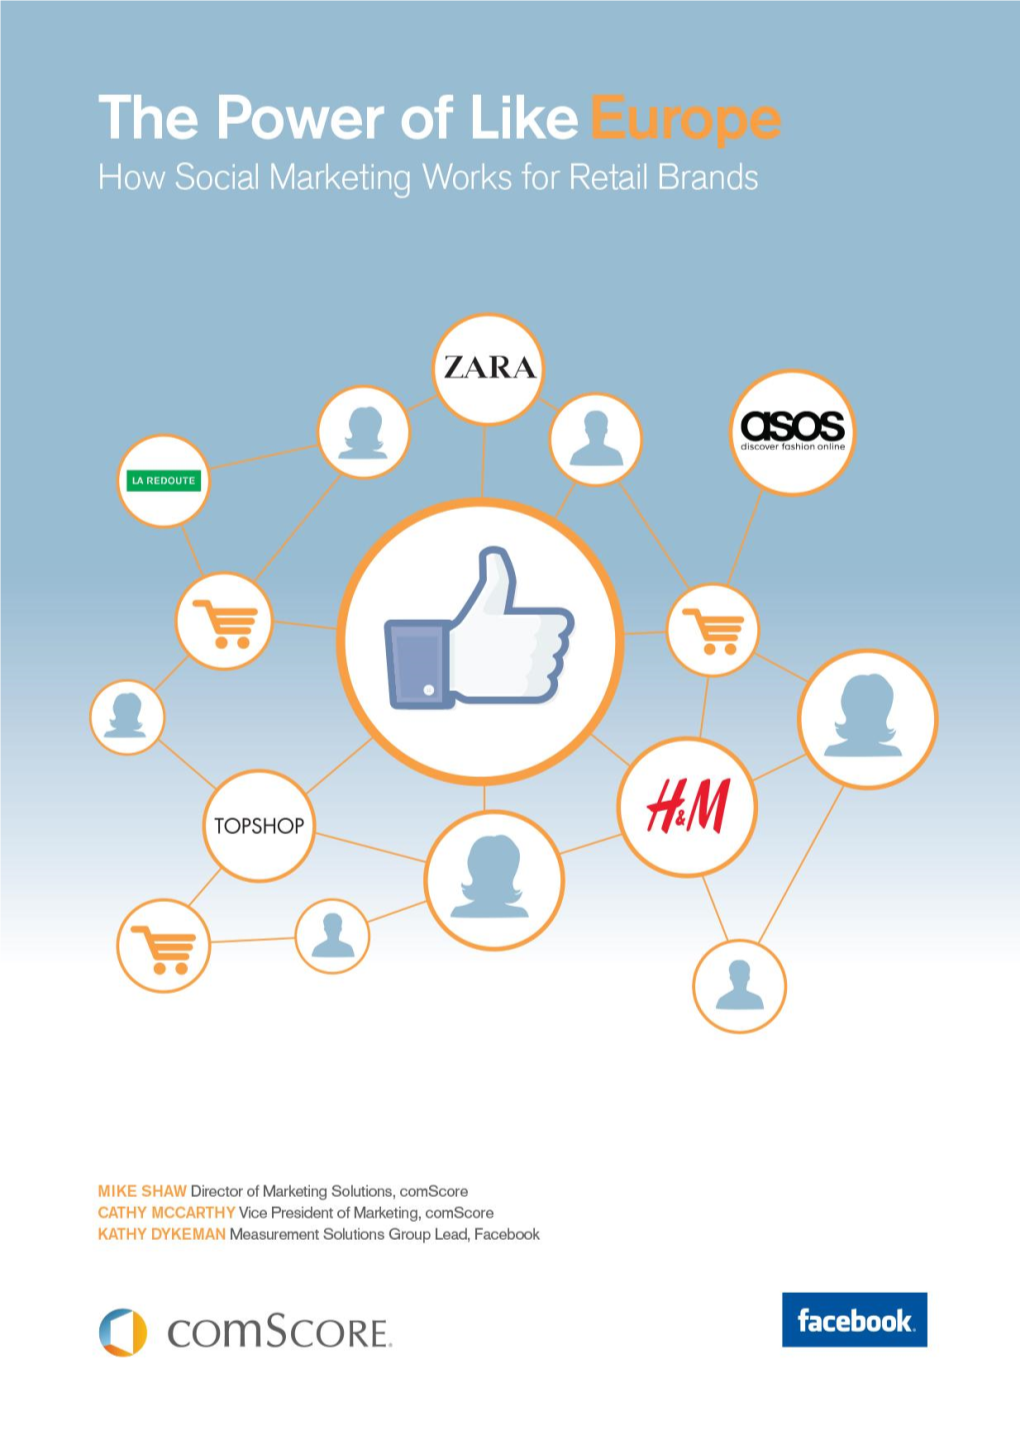 Comscore and Facebook and Is a Follow-Up to the Original Power of Like Study Conducted in the US in May 2011 and Power of Like 2, Published in June 2012